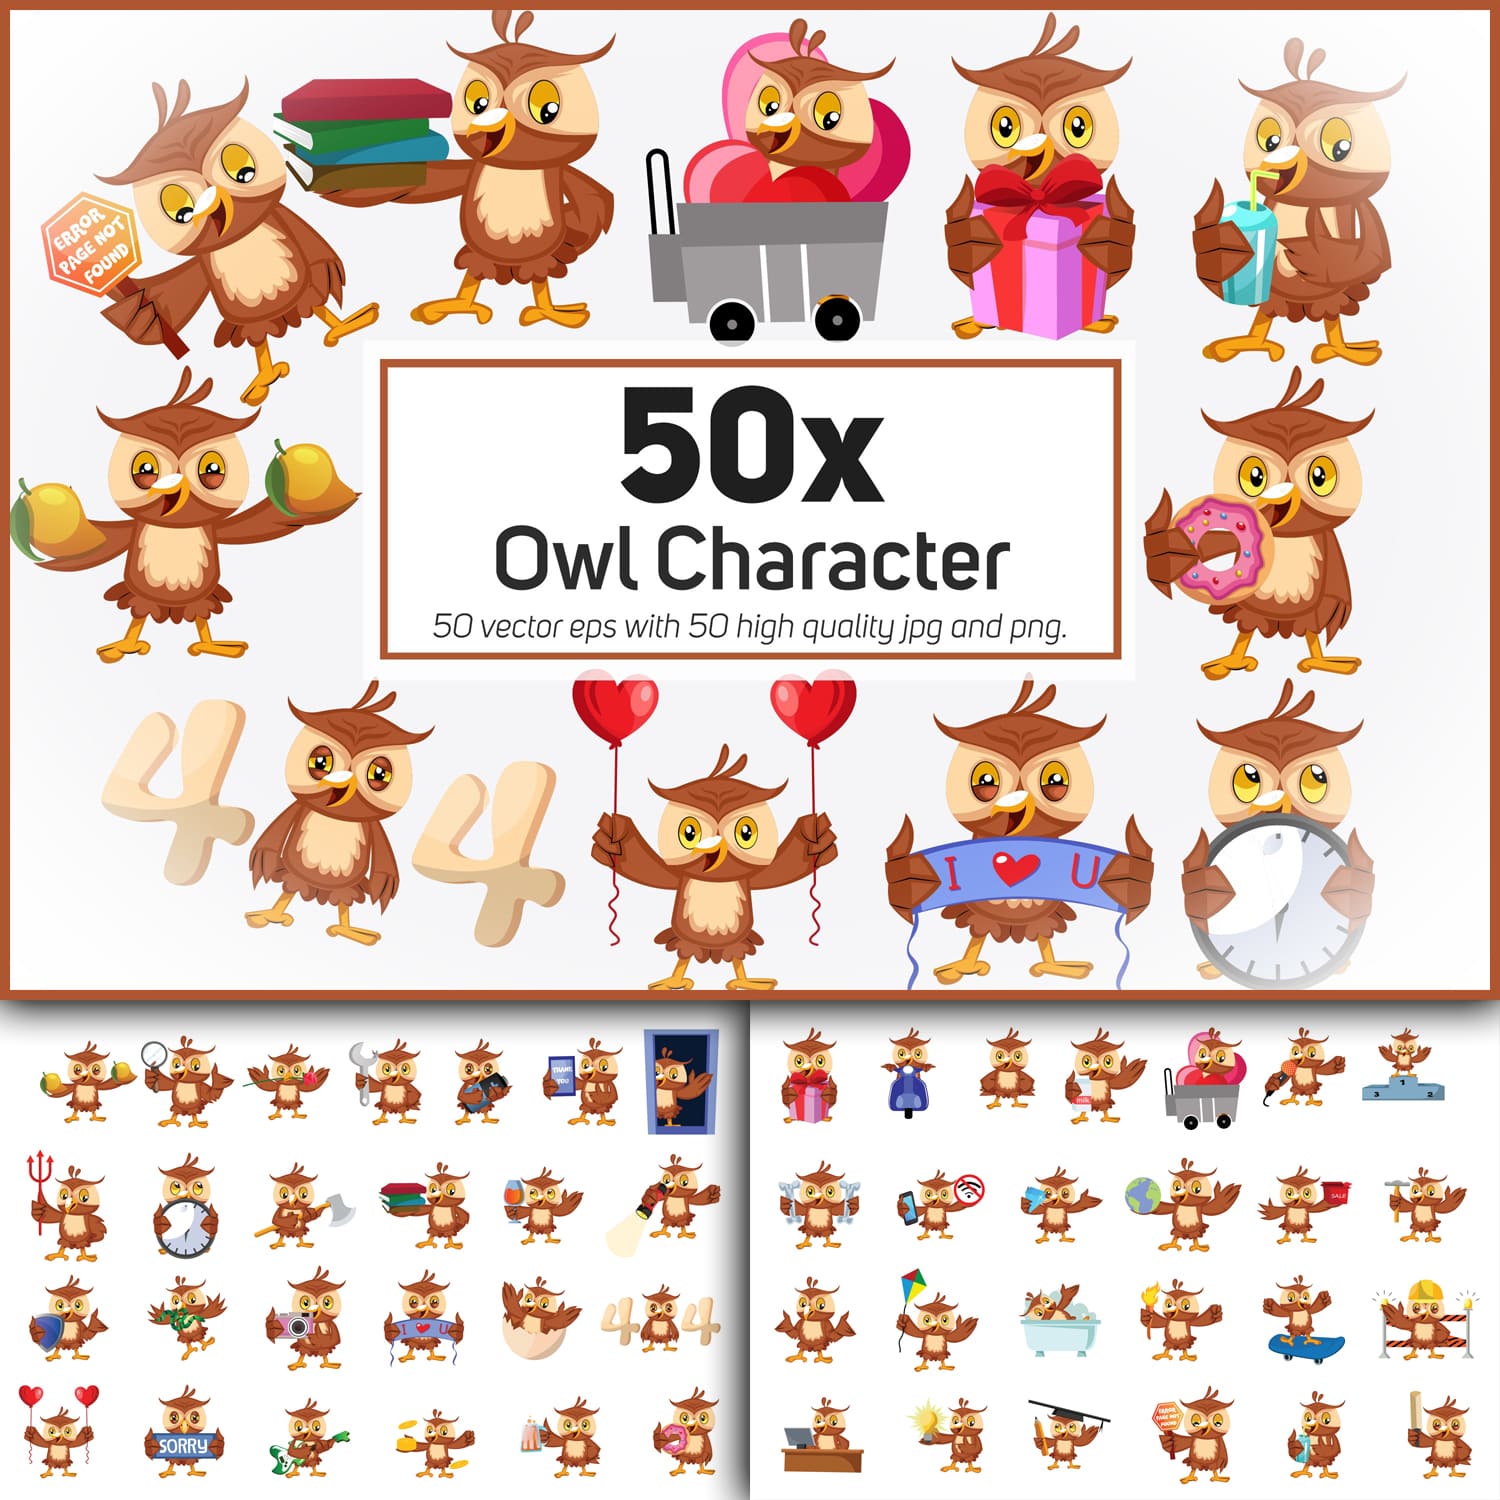 50x Owl Character and Mascot collection illustration. cover.